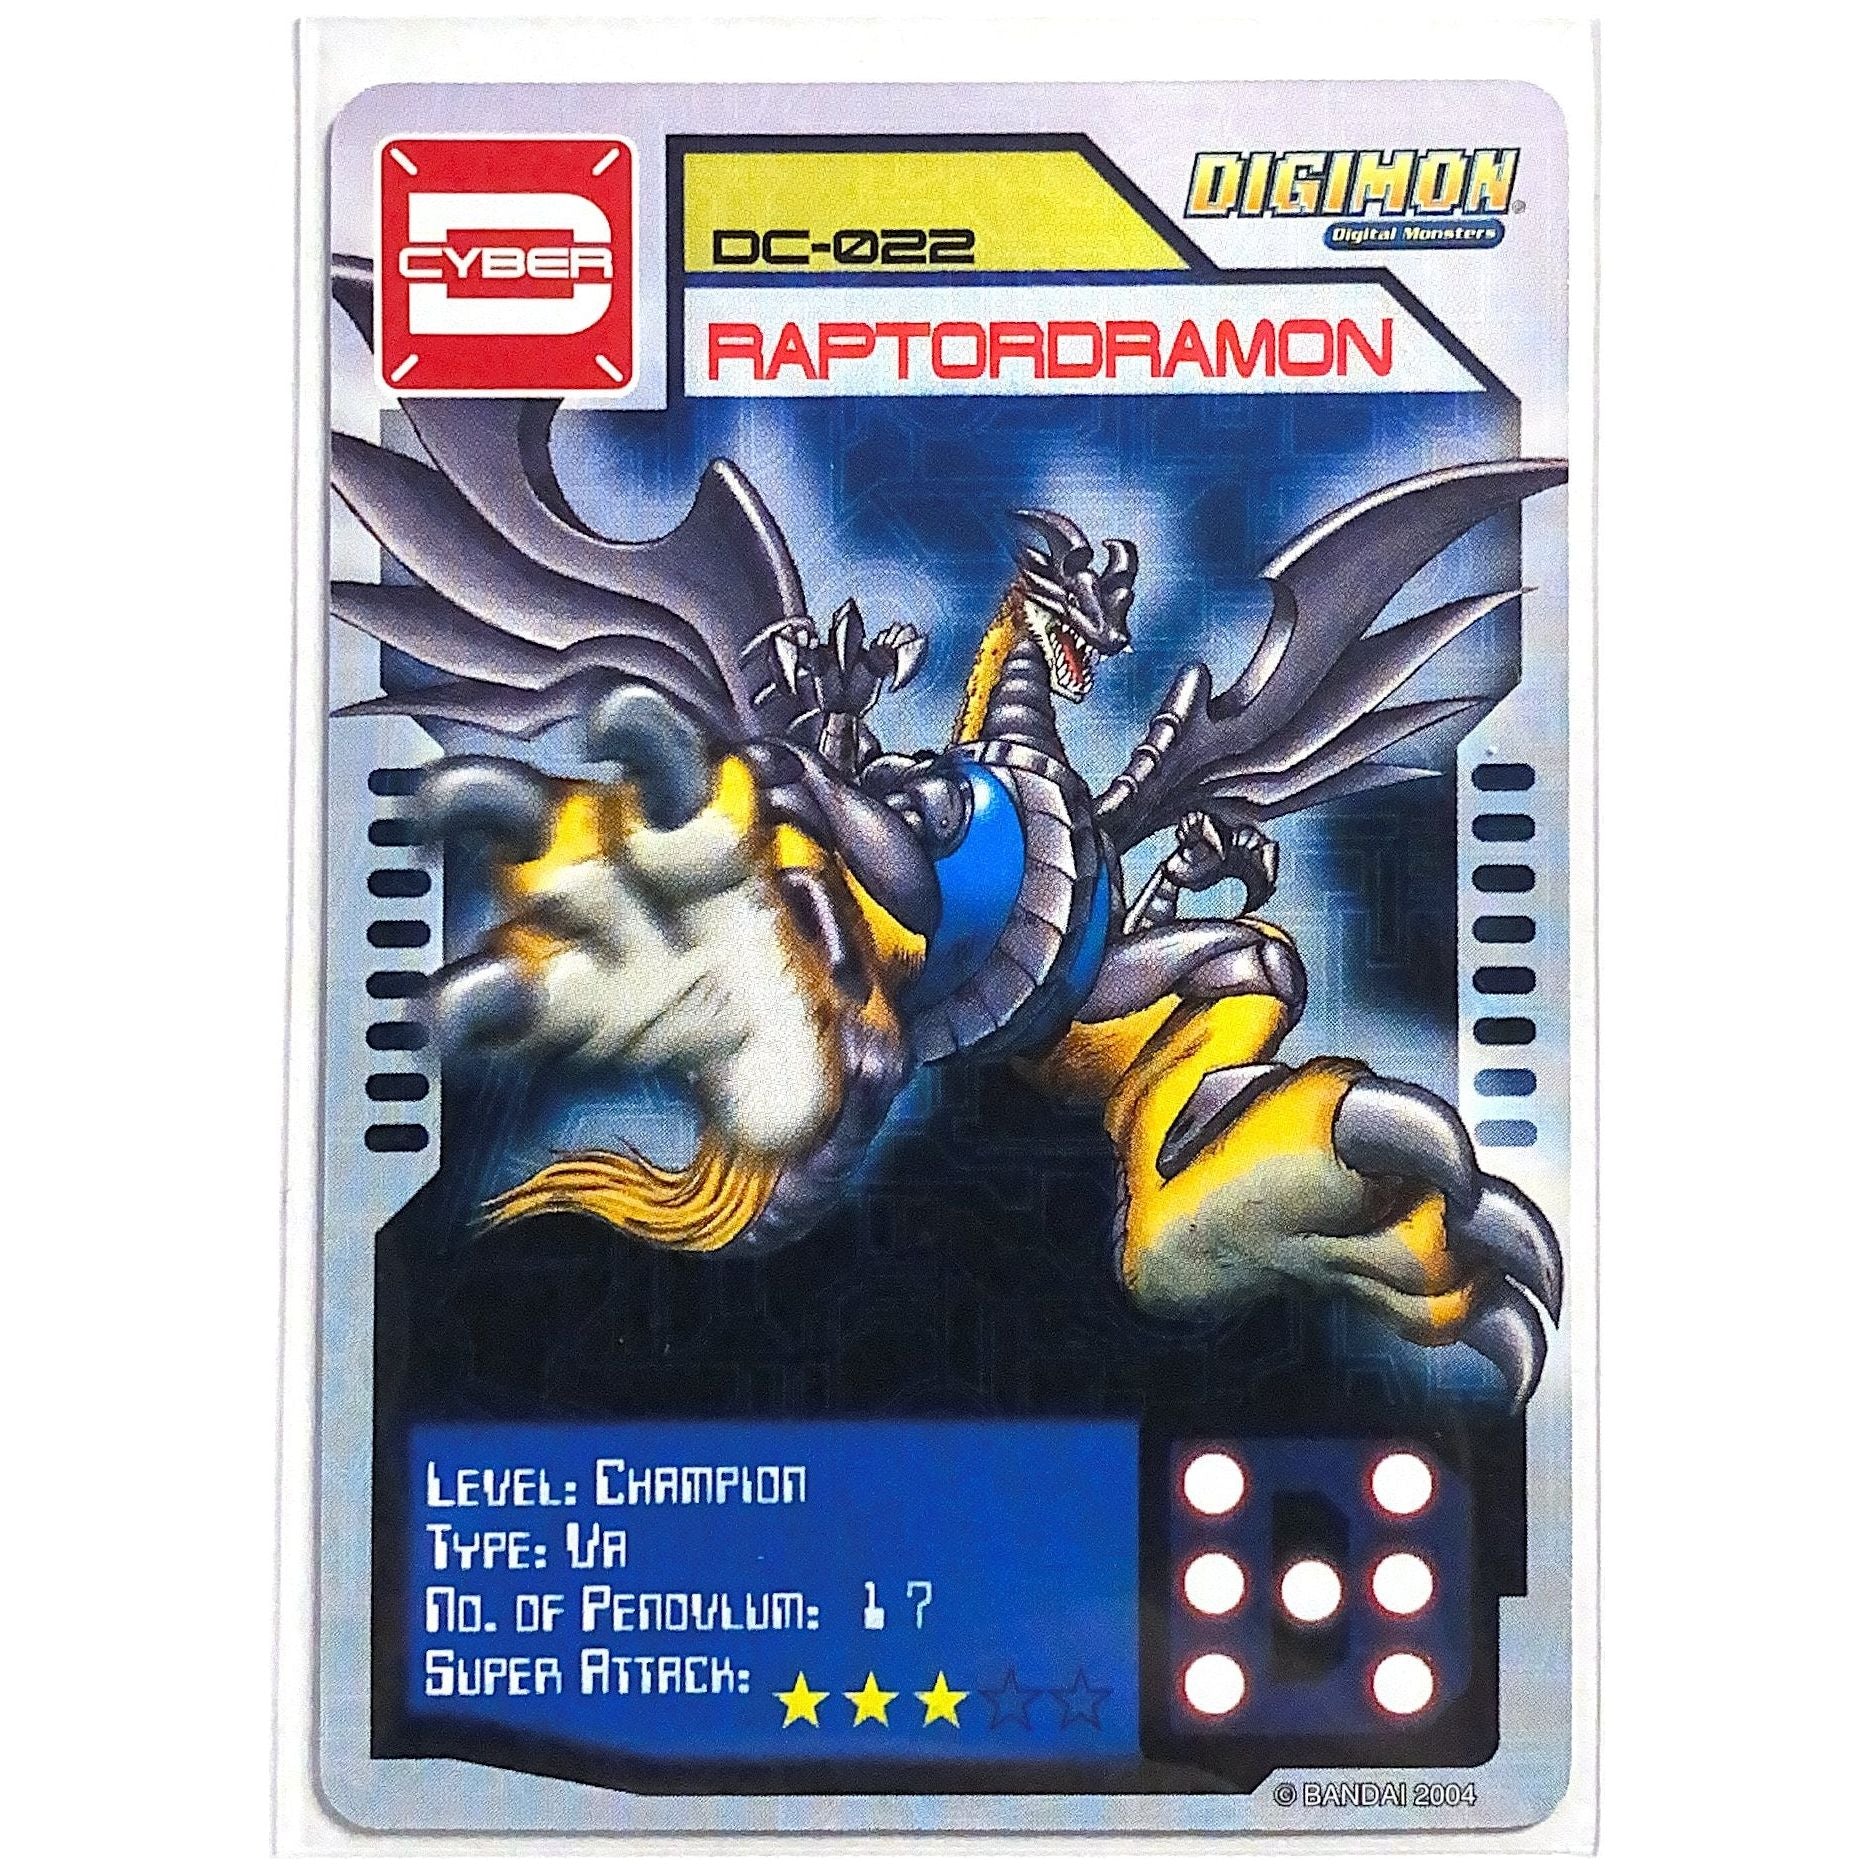  2004 D-Cyber Digimon Digivice Raptordramon DC-022  Local Legends Cards & Collectibles